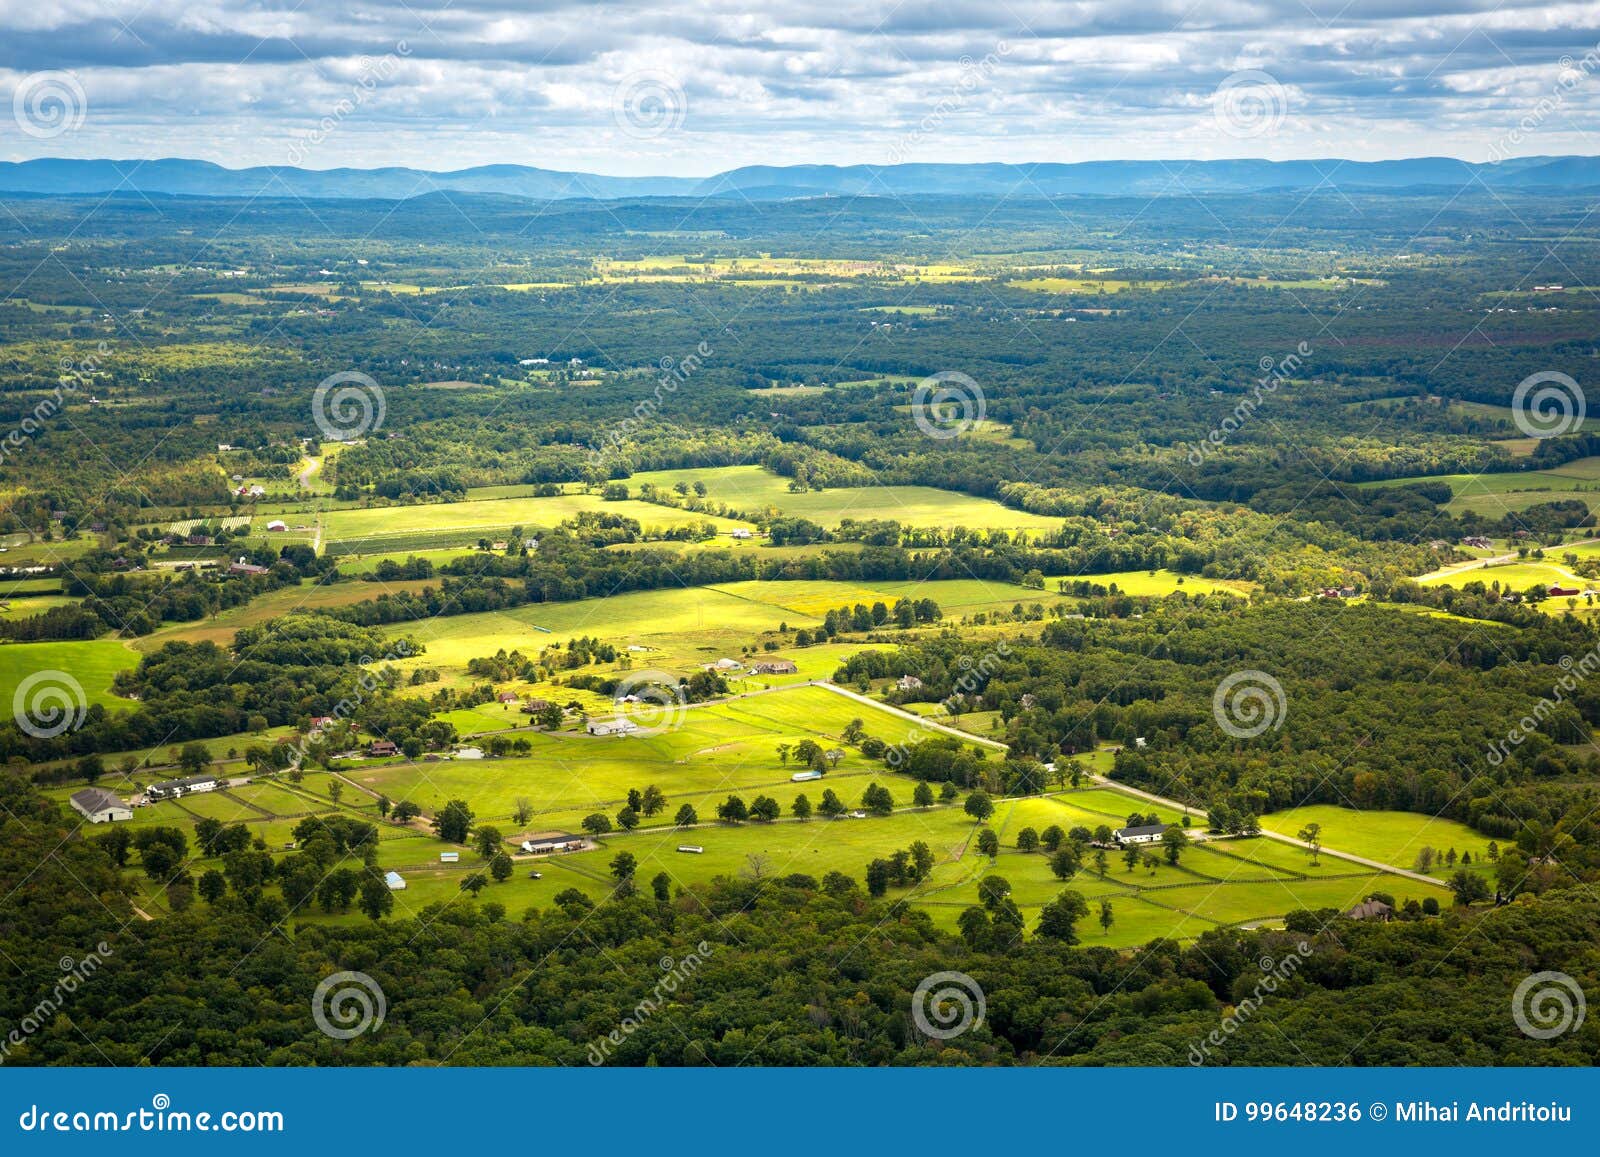 aerial view of the hudson valley farm land